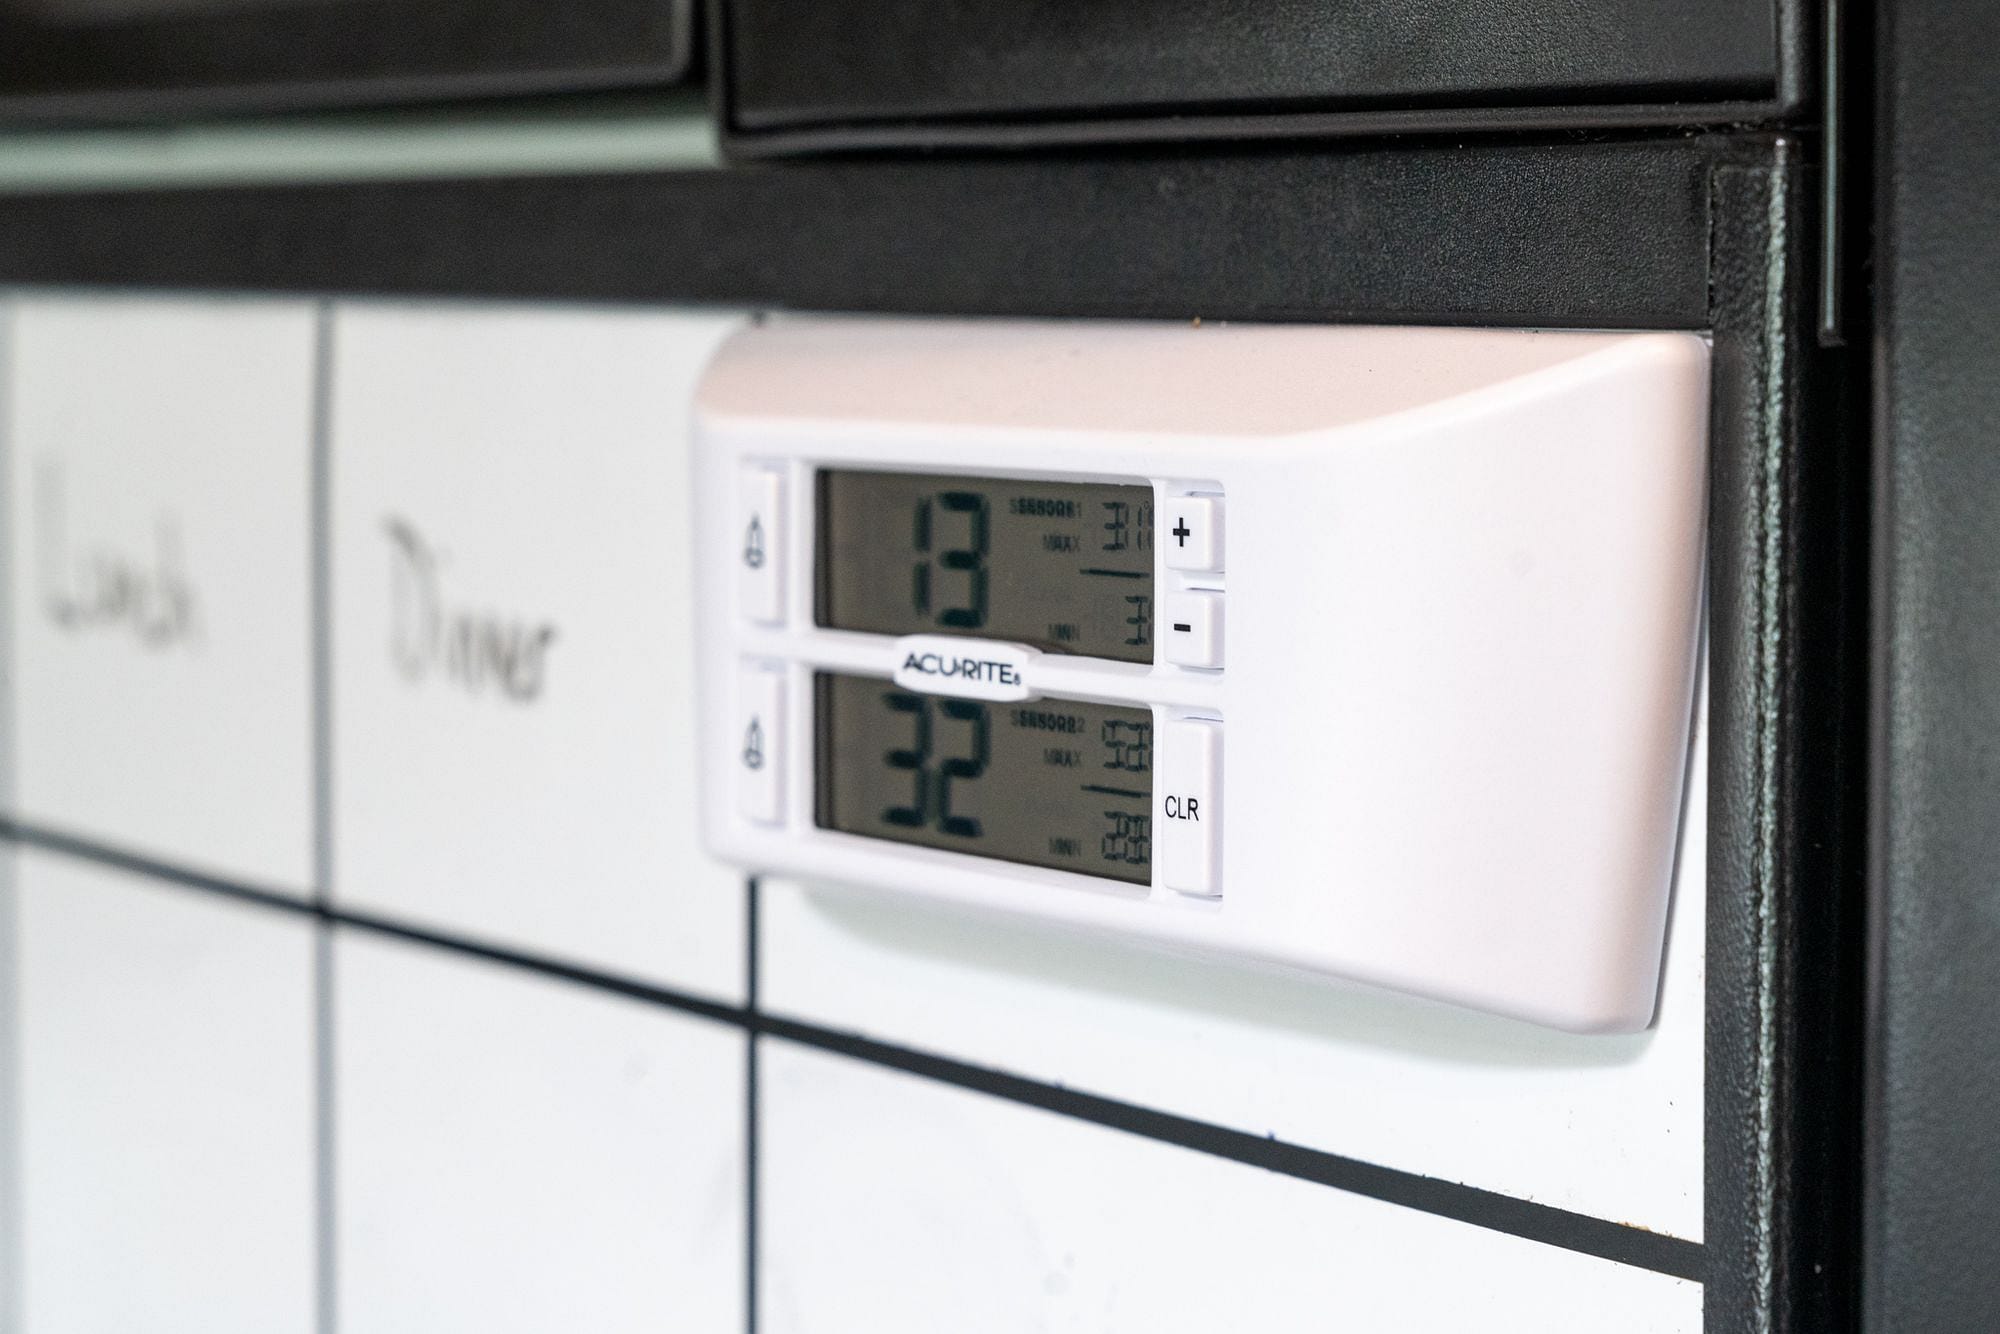 THE INTERSTATE BLOG: INSTALLING A DIGITAL THERMOMETER ON A DOMETIC RV FRIDGE